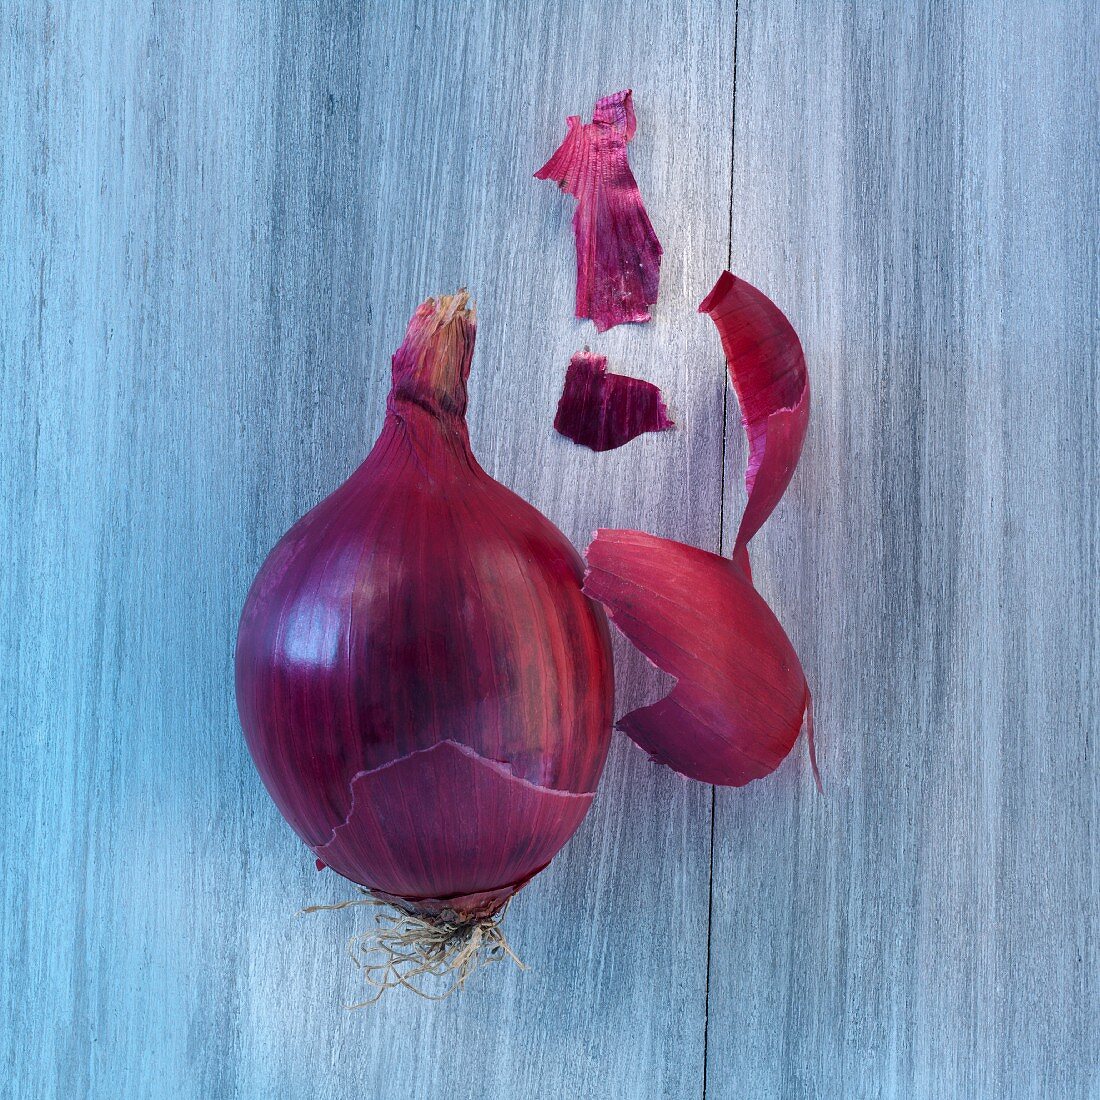 A red onion and onion skin